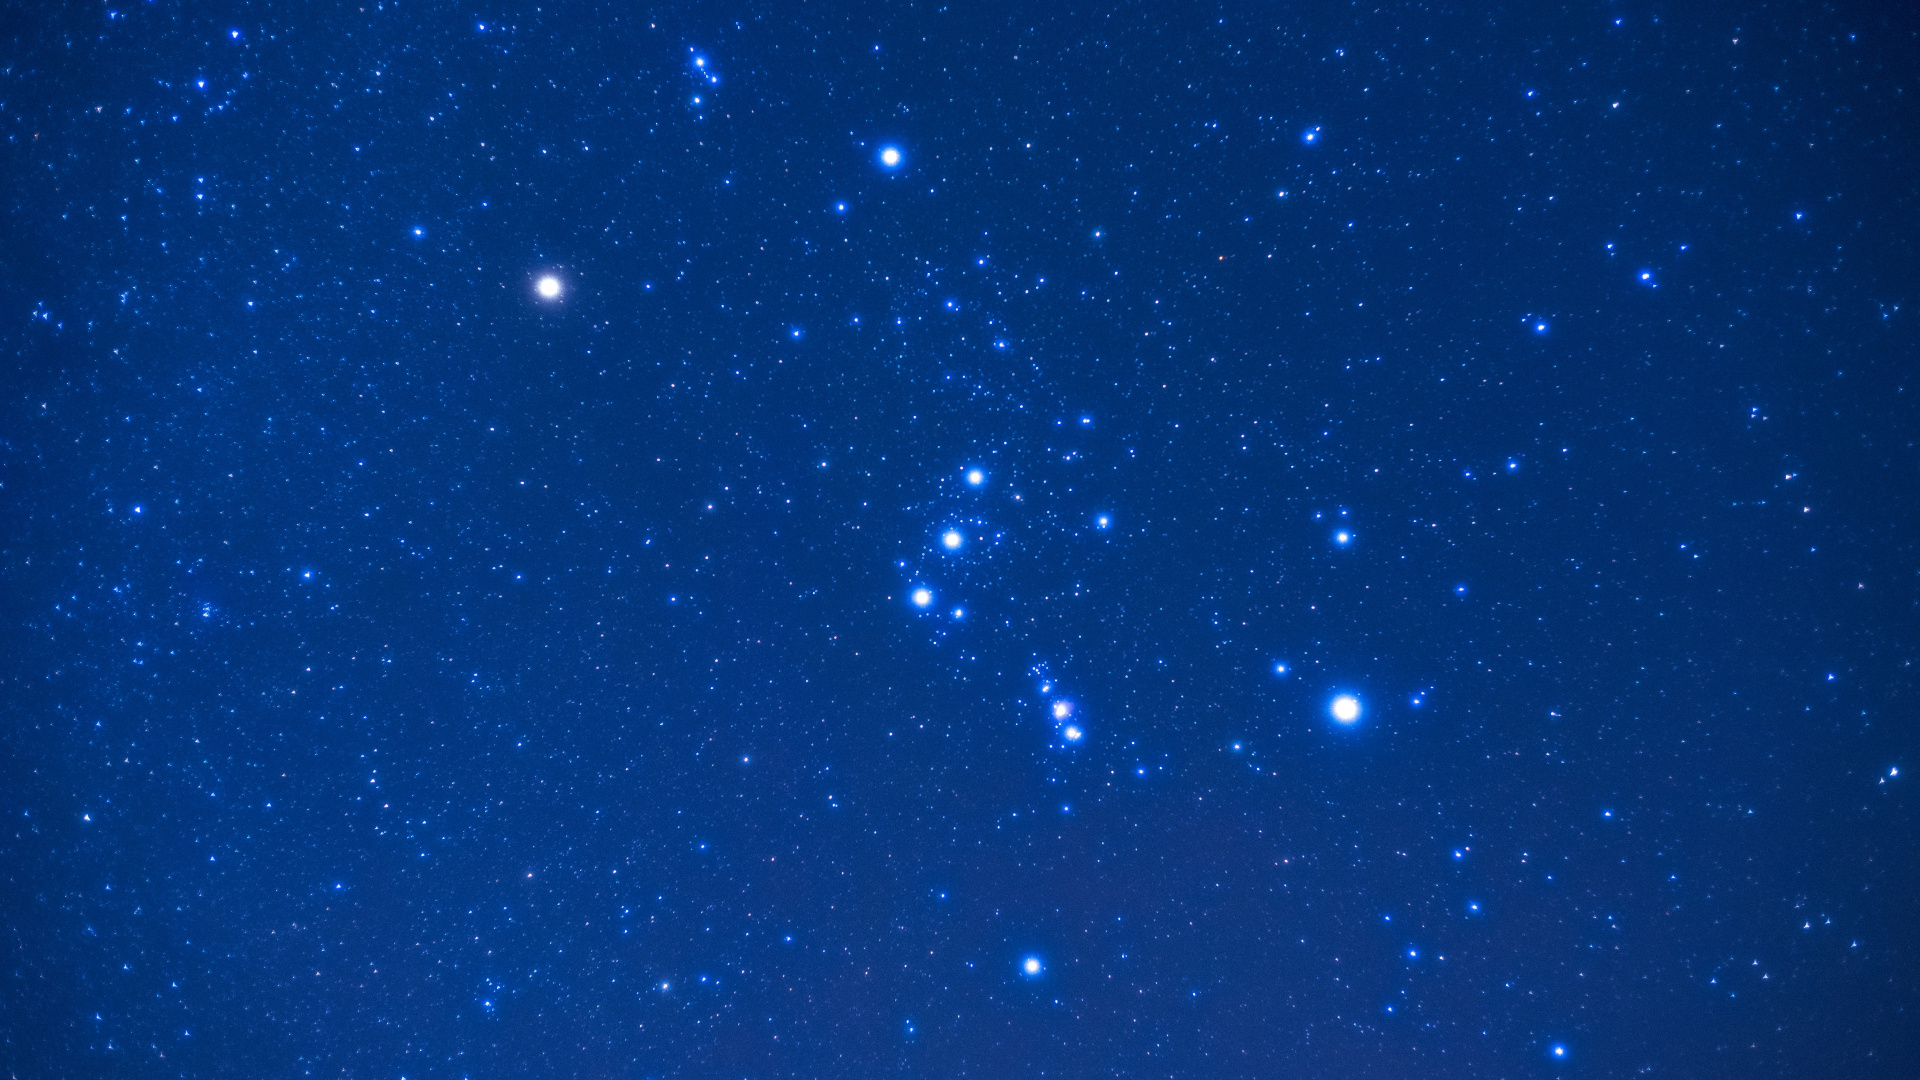 Blue and White Stars in Blue Sky. Wallpaper in 1920x1080 Resolution